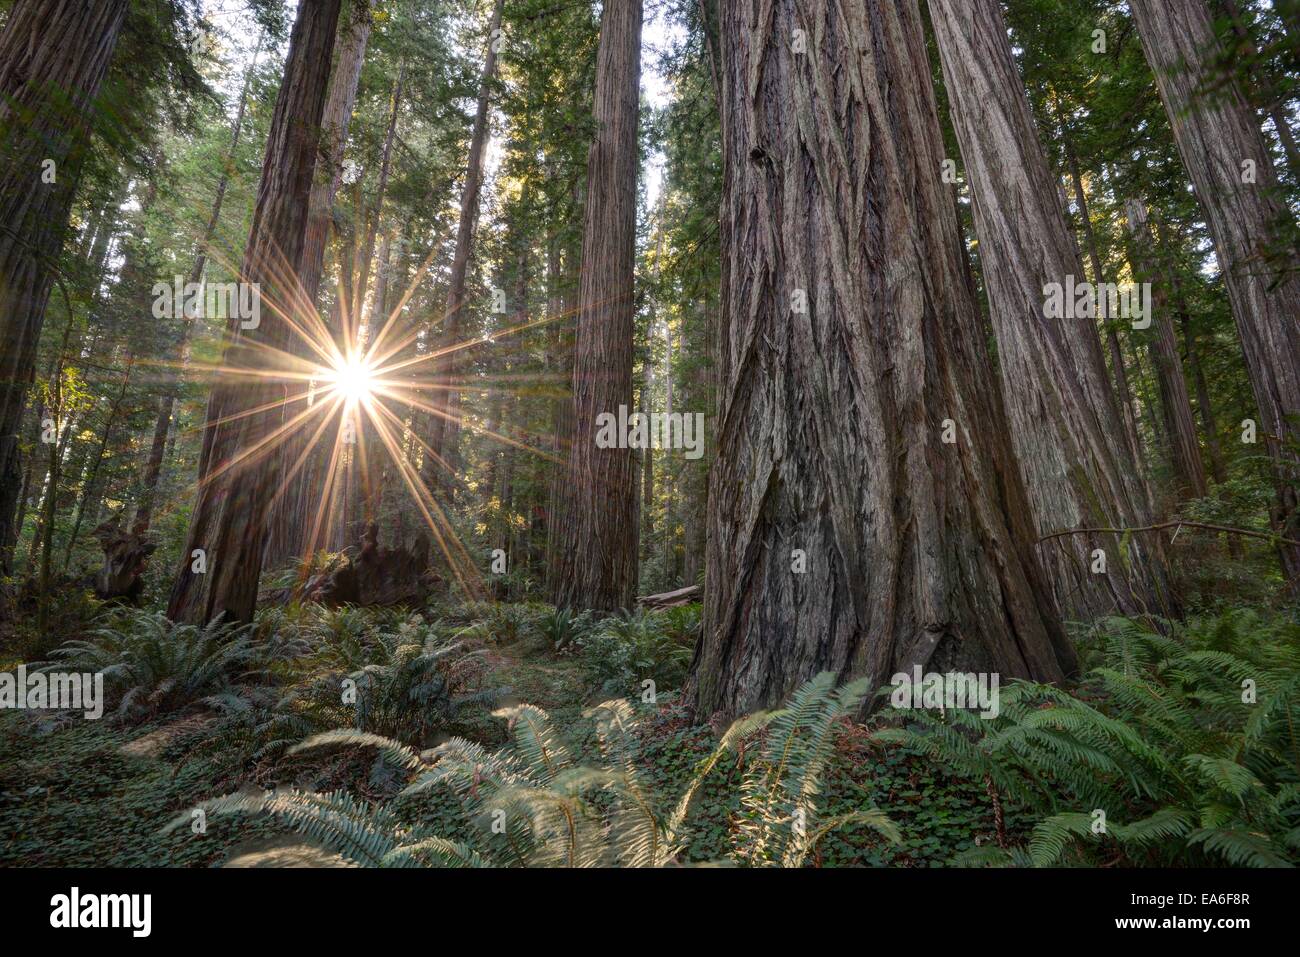 USA, California, Humboldt Count, Eureka, Redwood National Park, Deep in forest Stock Photo